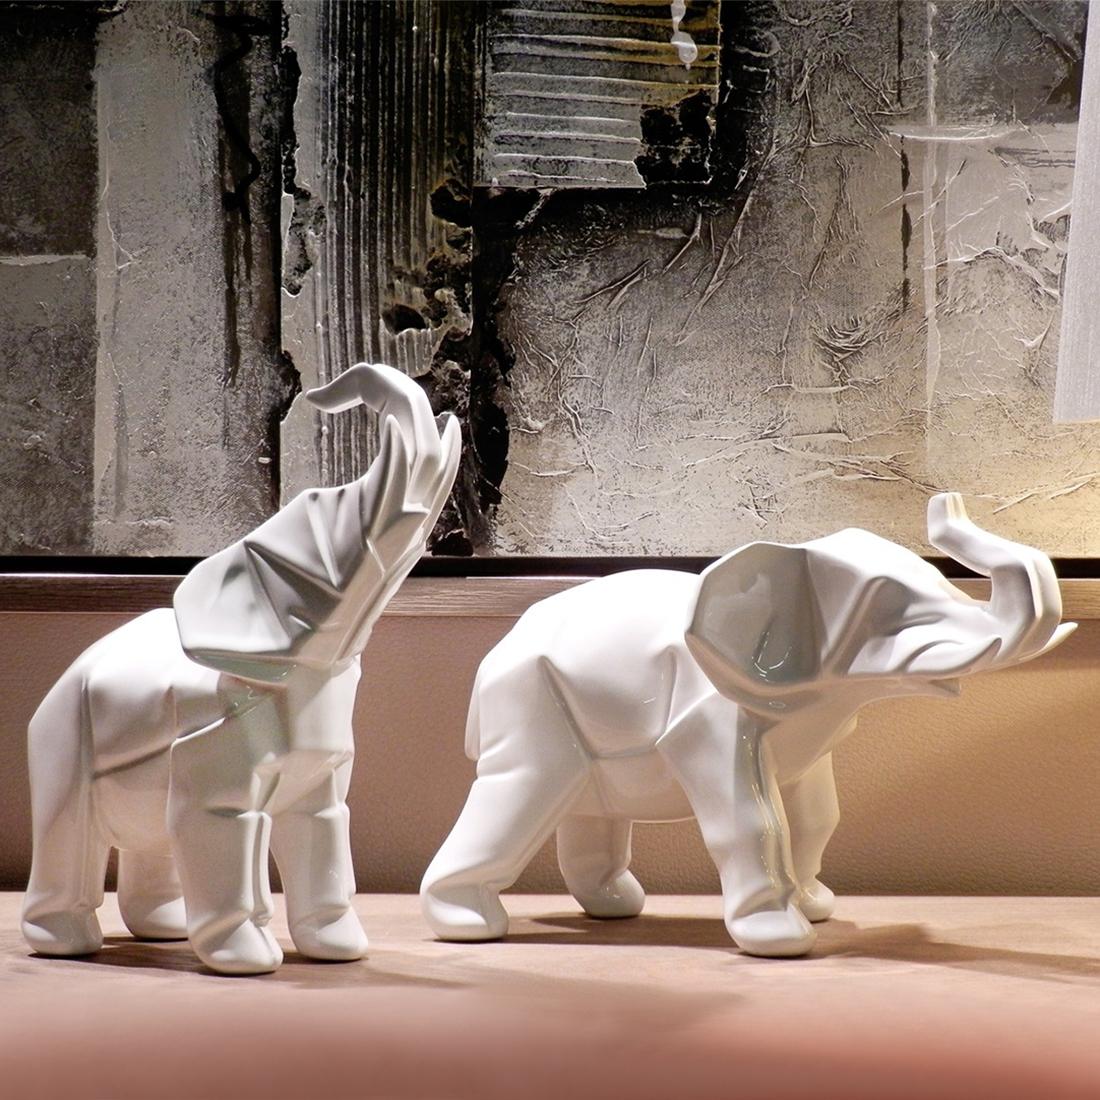 Sculpture elephants set of 2
all in white ceramic.
Measures: A/ L 28 x D 12 x H 18 cm.
B/ L 24 x D 9 x H 22 cm.